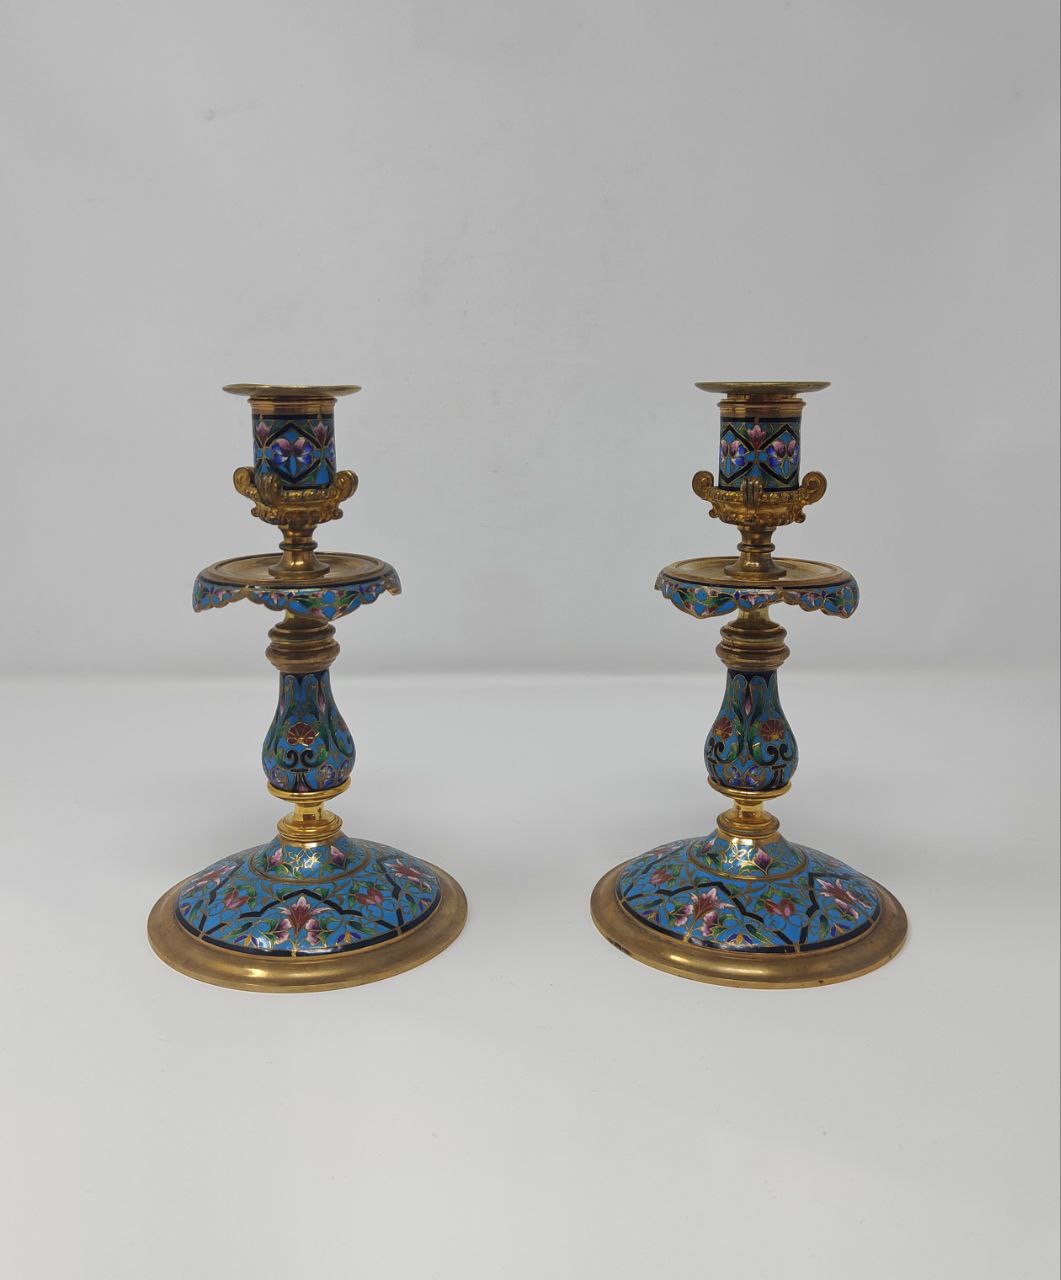 Pair of Champleve enamel and bronze Candle stick holders